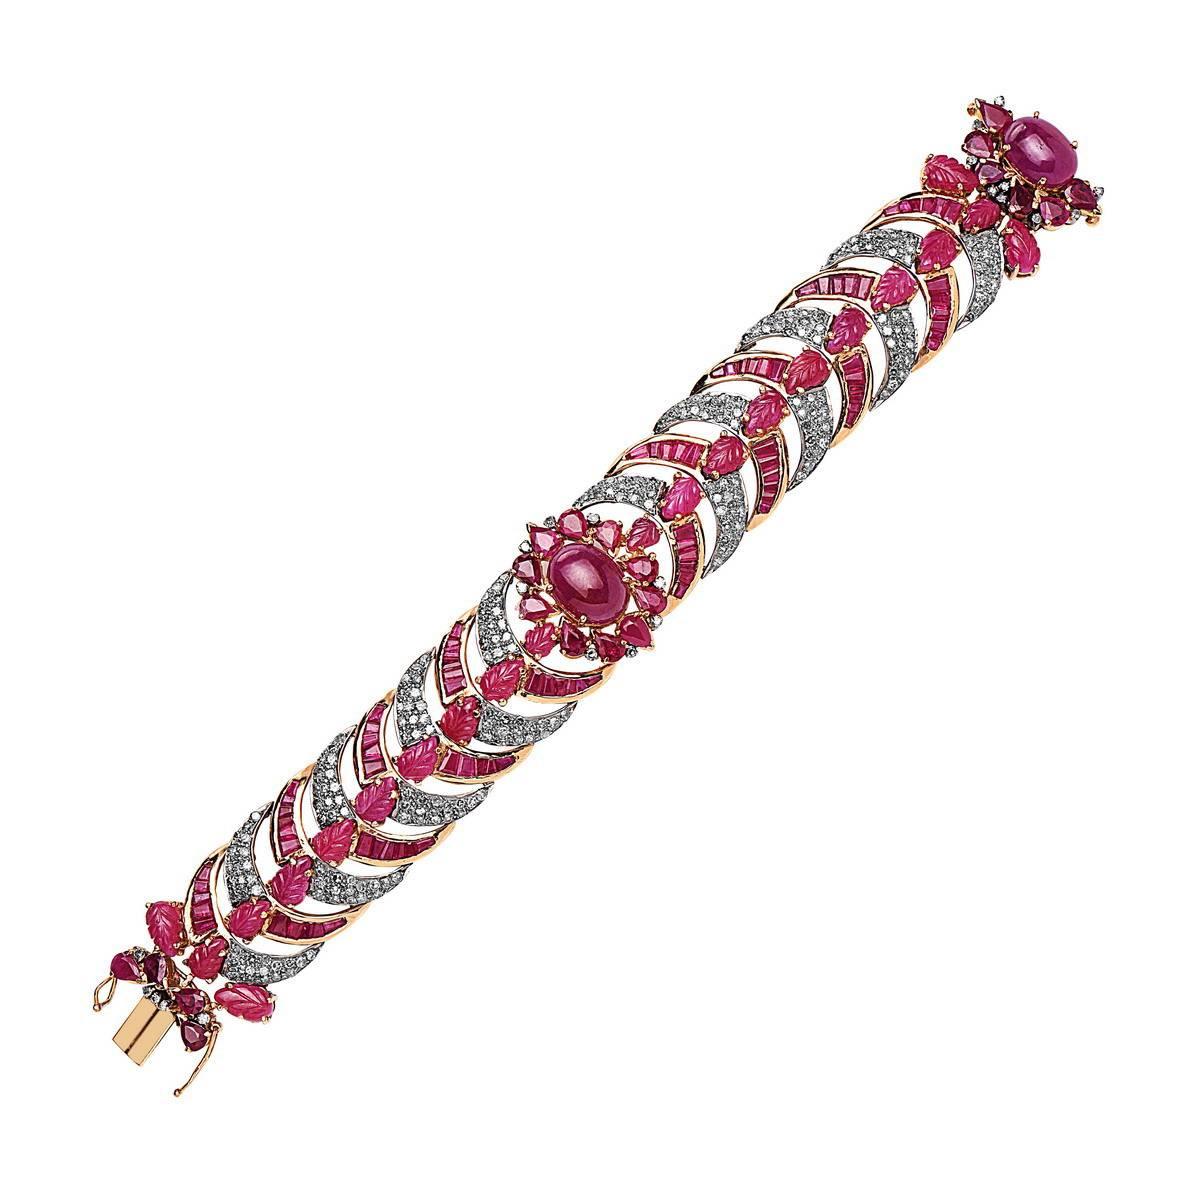 Alluring Diamond and Ruby bracelet in 18K white and yellow gold. This bracelet has carved ruby leaves, oval cabachon and baguettes with pave diamonds.  
Closure: Tongue clasps

18k: 55.65g
Diamond: 4.64ct
Ruby: 31.52cts